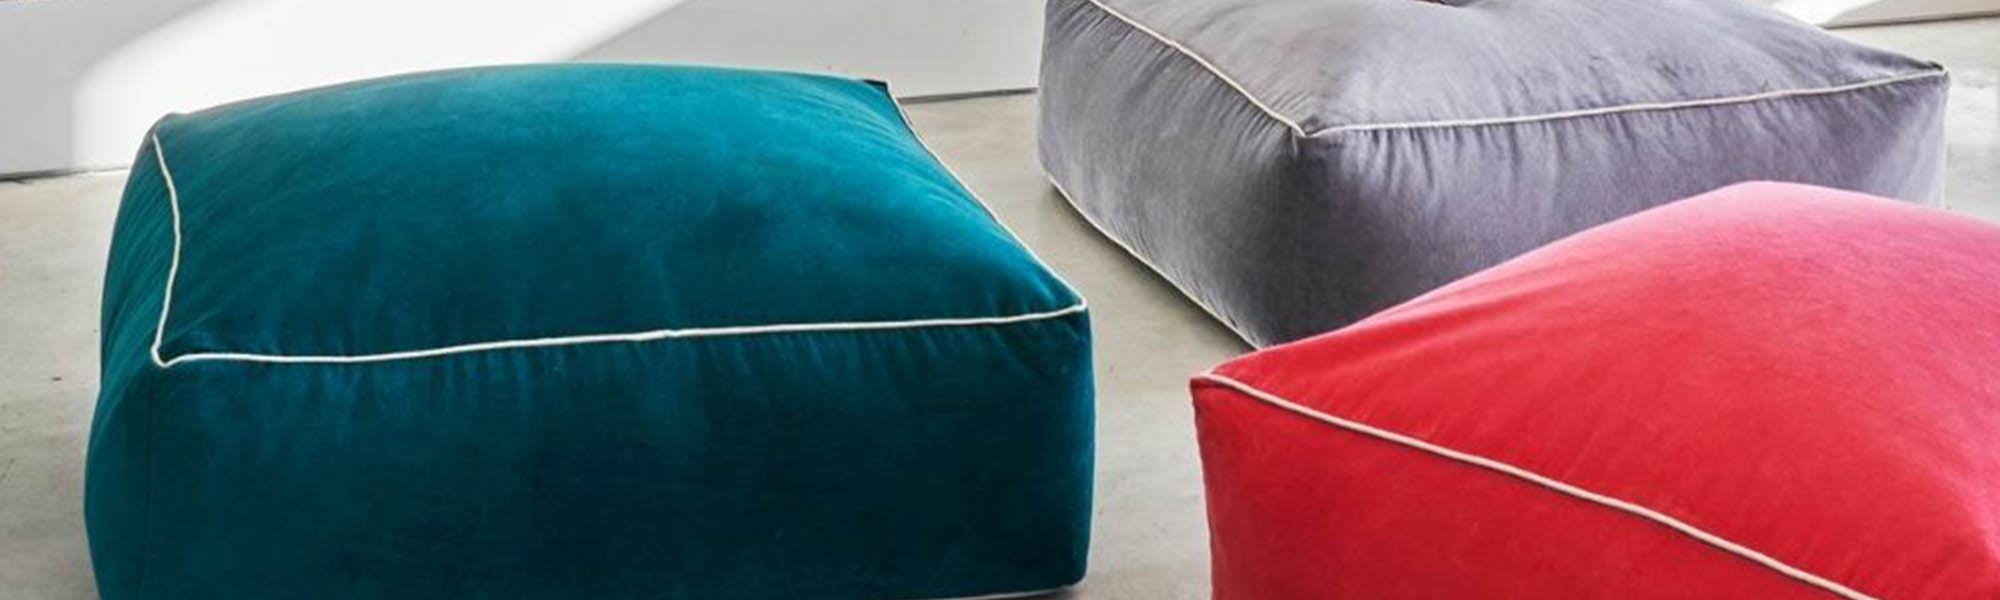 Turquoise, red and gray upholstered pouffes